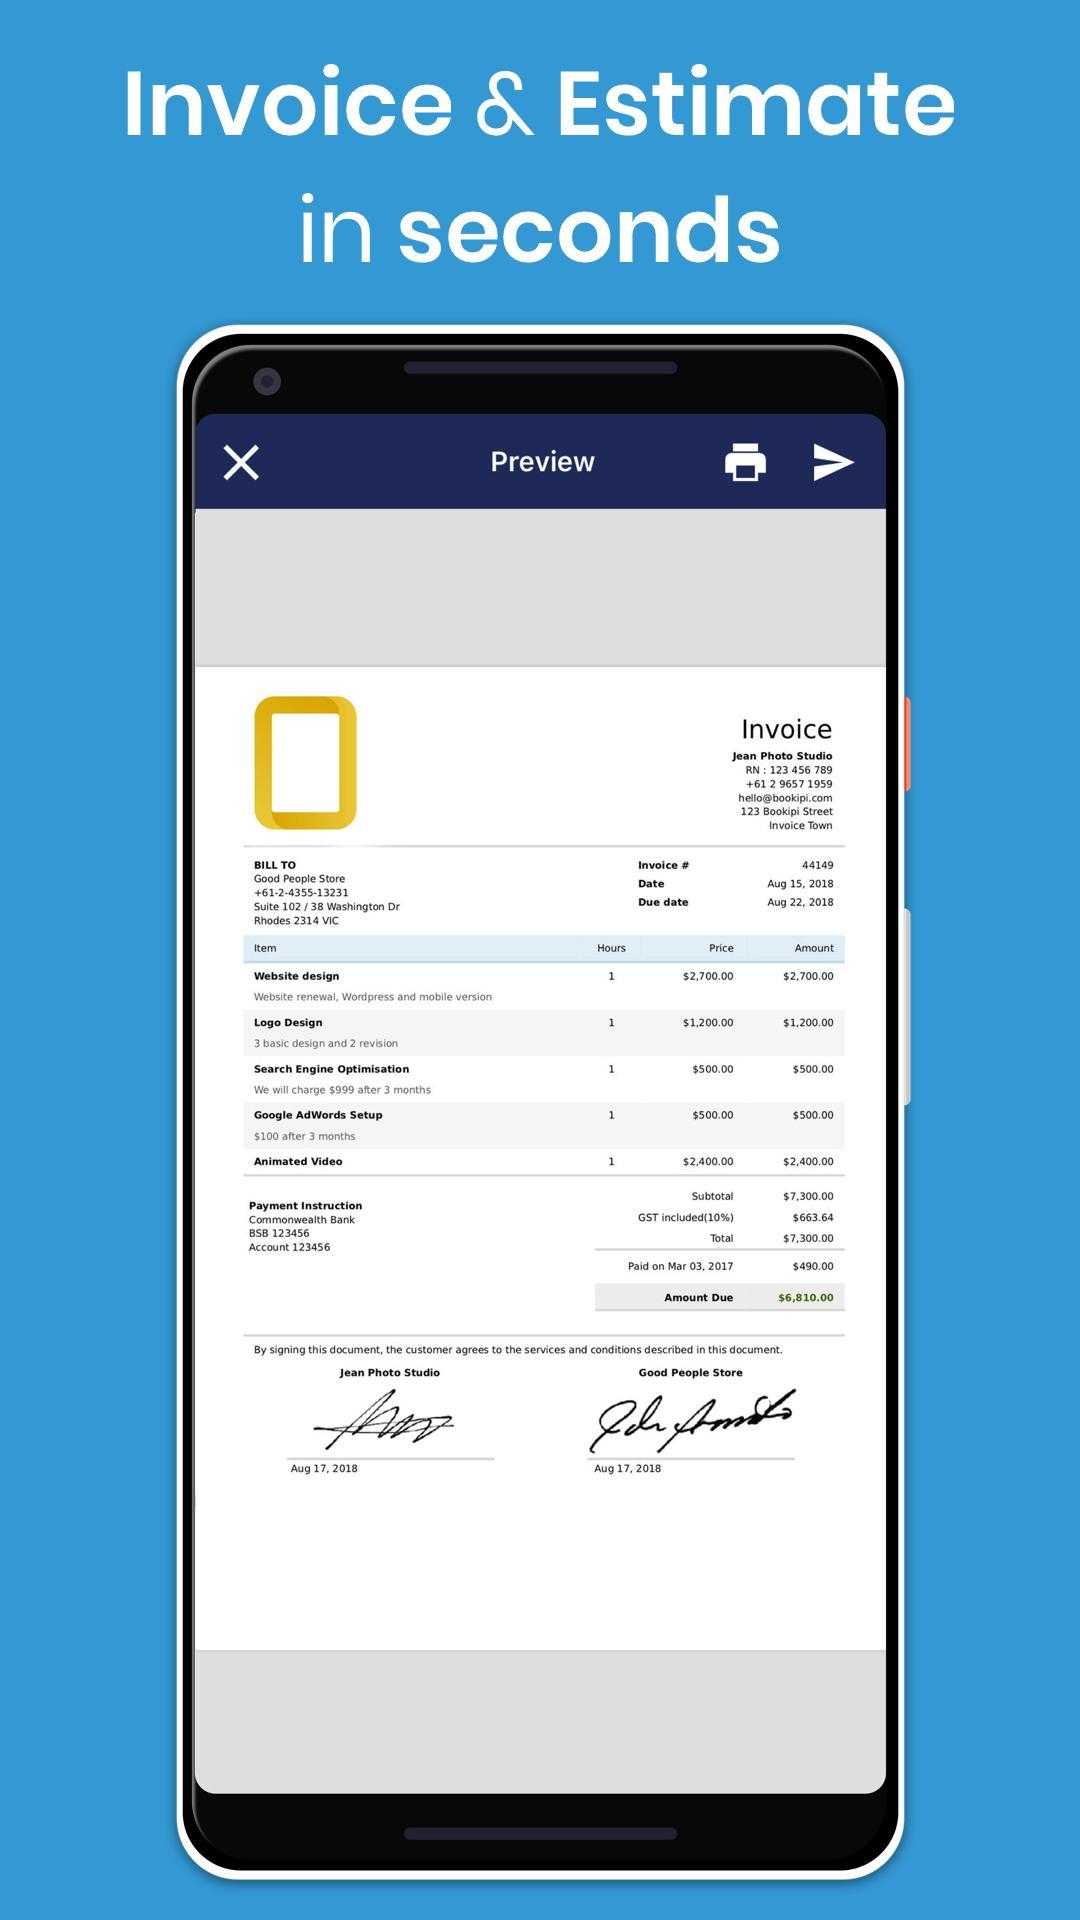 Free Invoice & Estimate Template Generator For Android - Apk Intended For Free Invoice Template For Android